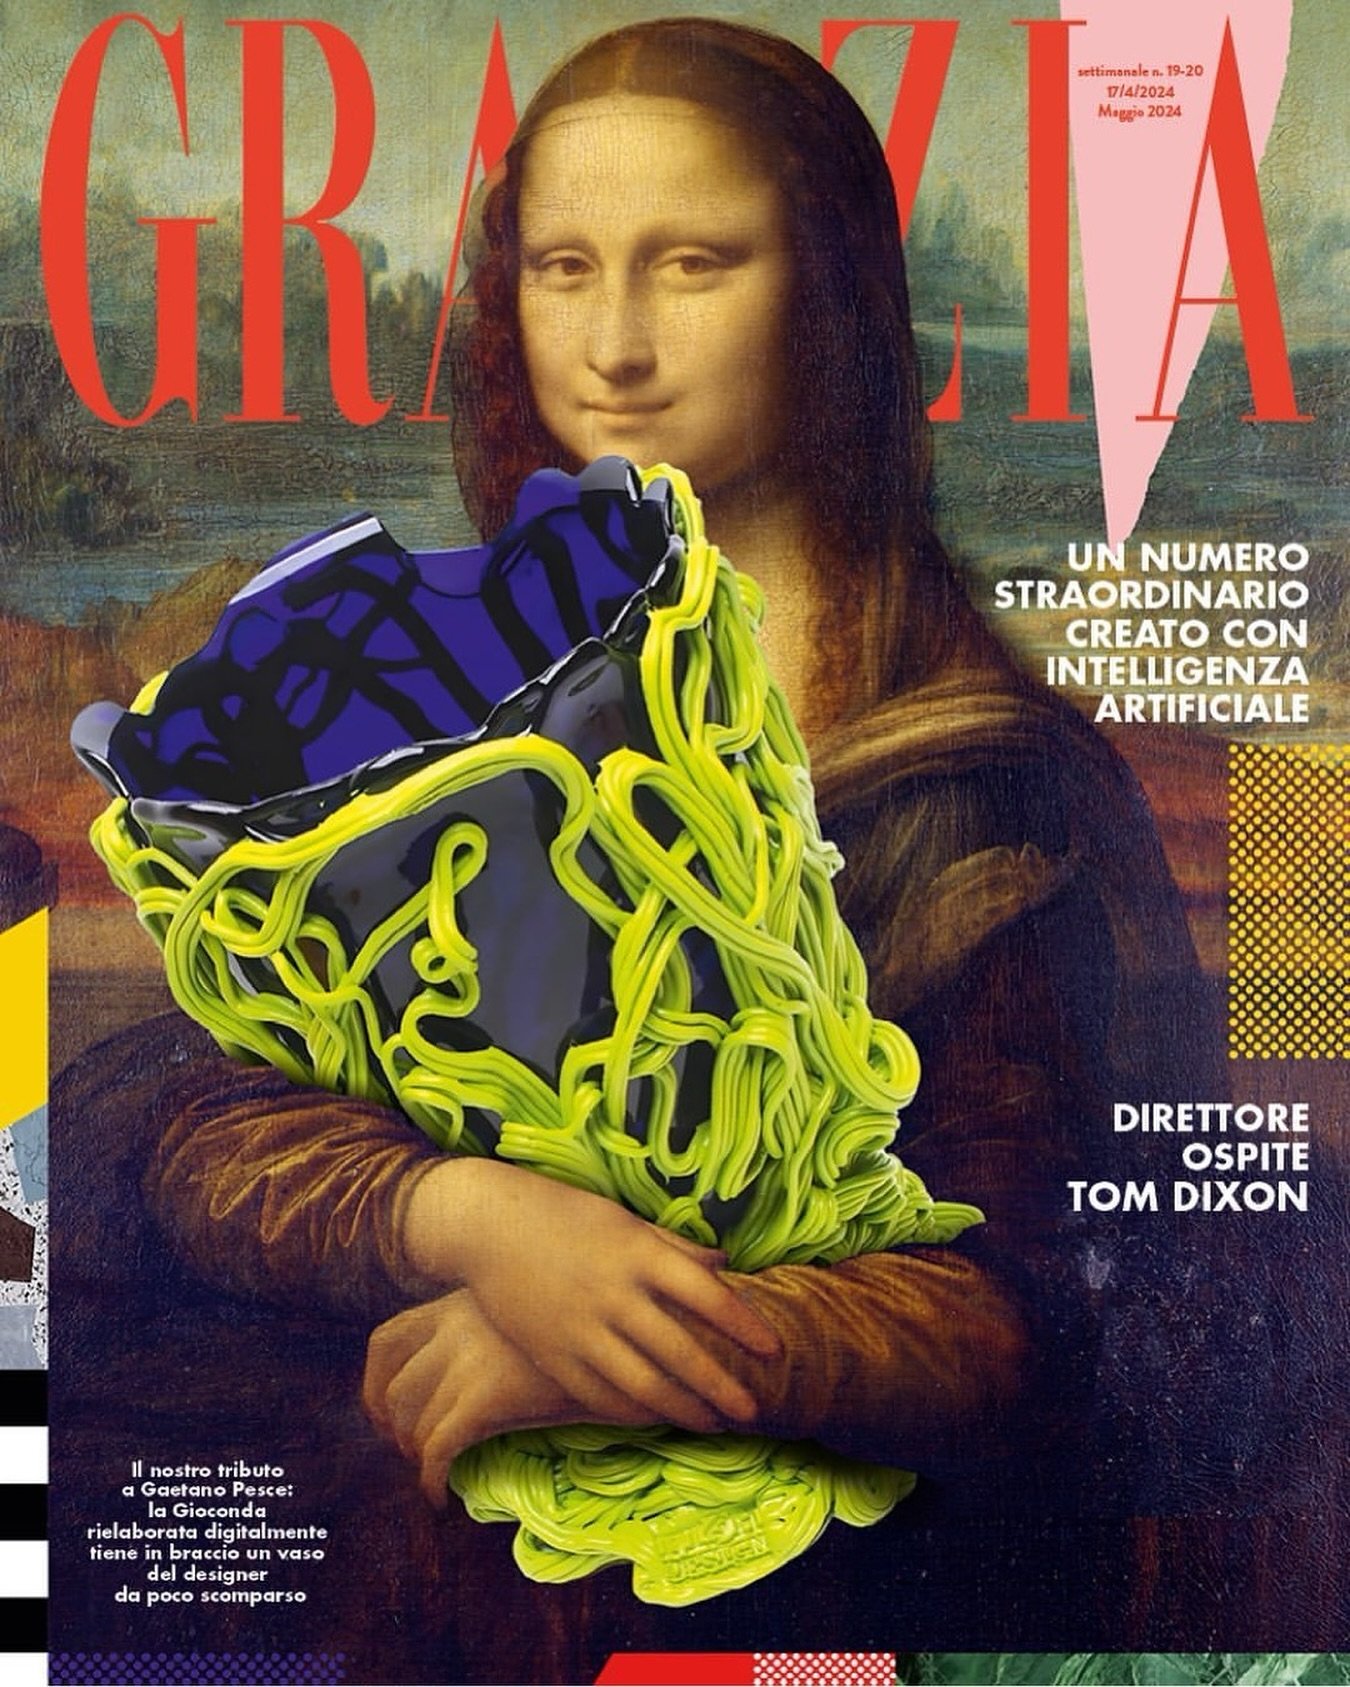 I&rsquo;m very excited to announce that my work &ldquo;Imagined Images&rdquo; is featured in the  special issue of @grazia_it magazine, exploring the world of Artificial Intelligence.⁠ guest edited by Tom Dixon Studio @tomdixonstudio among the work o